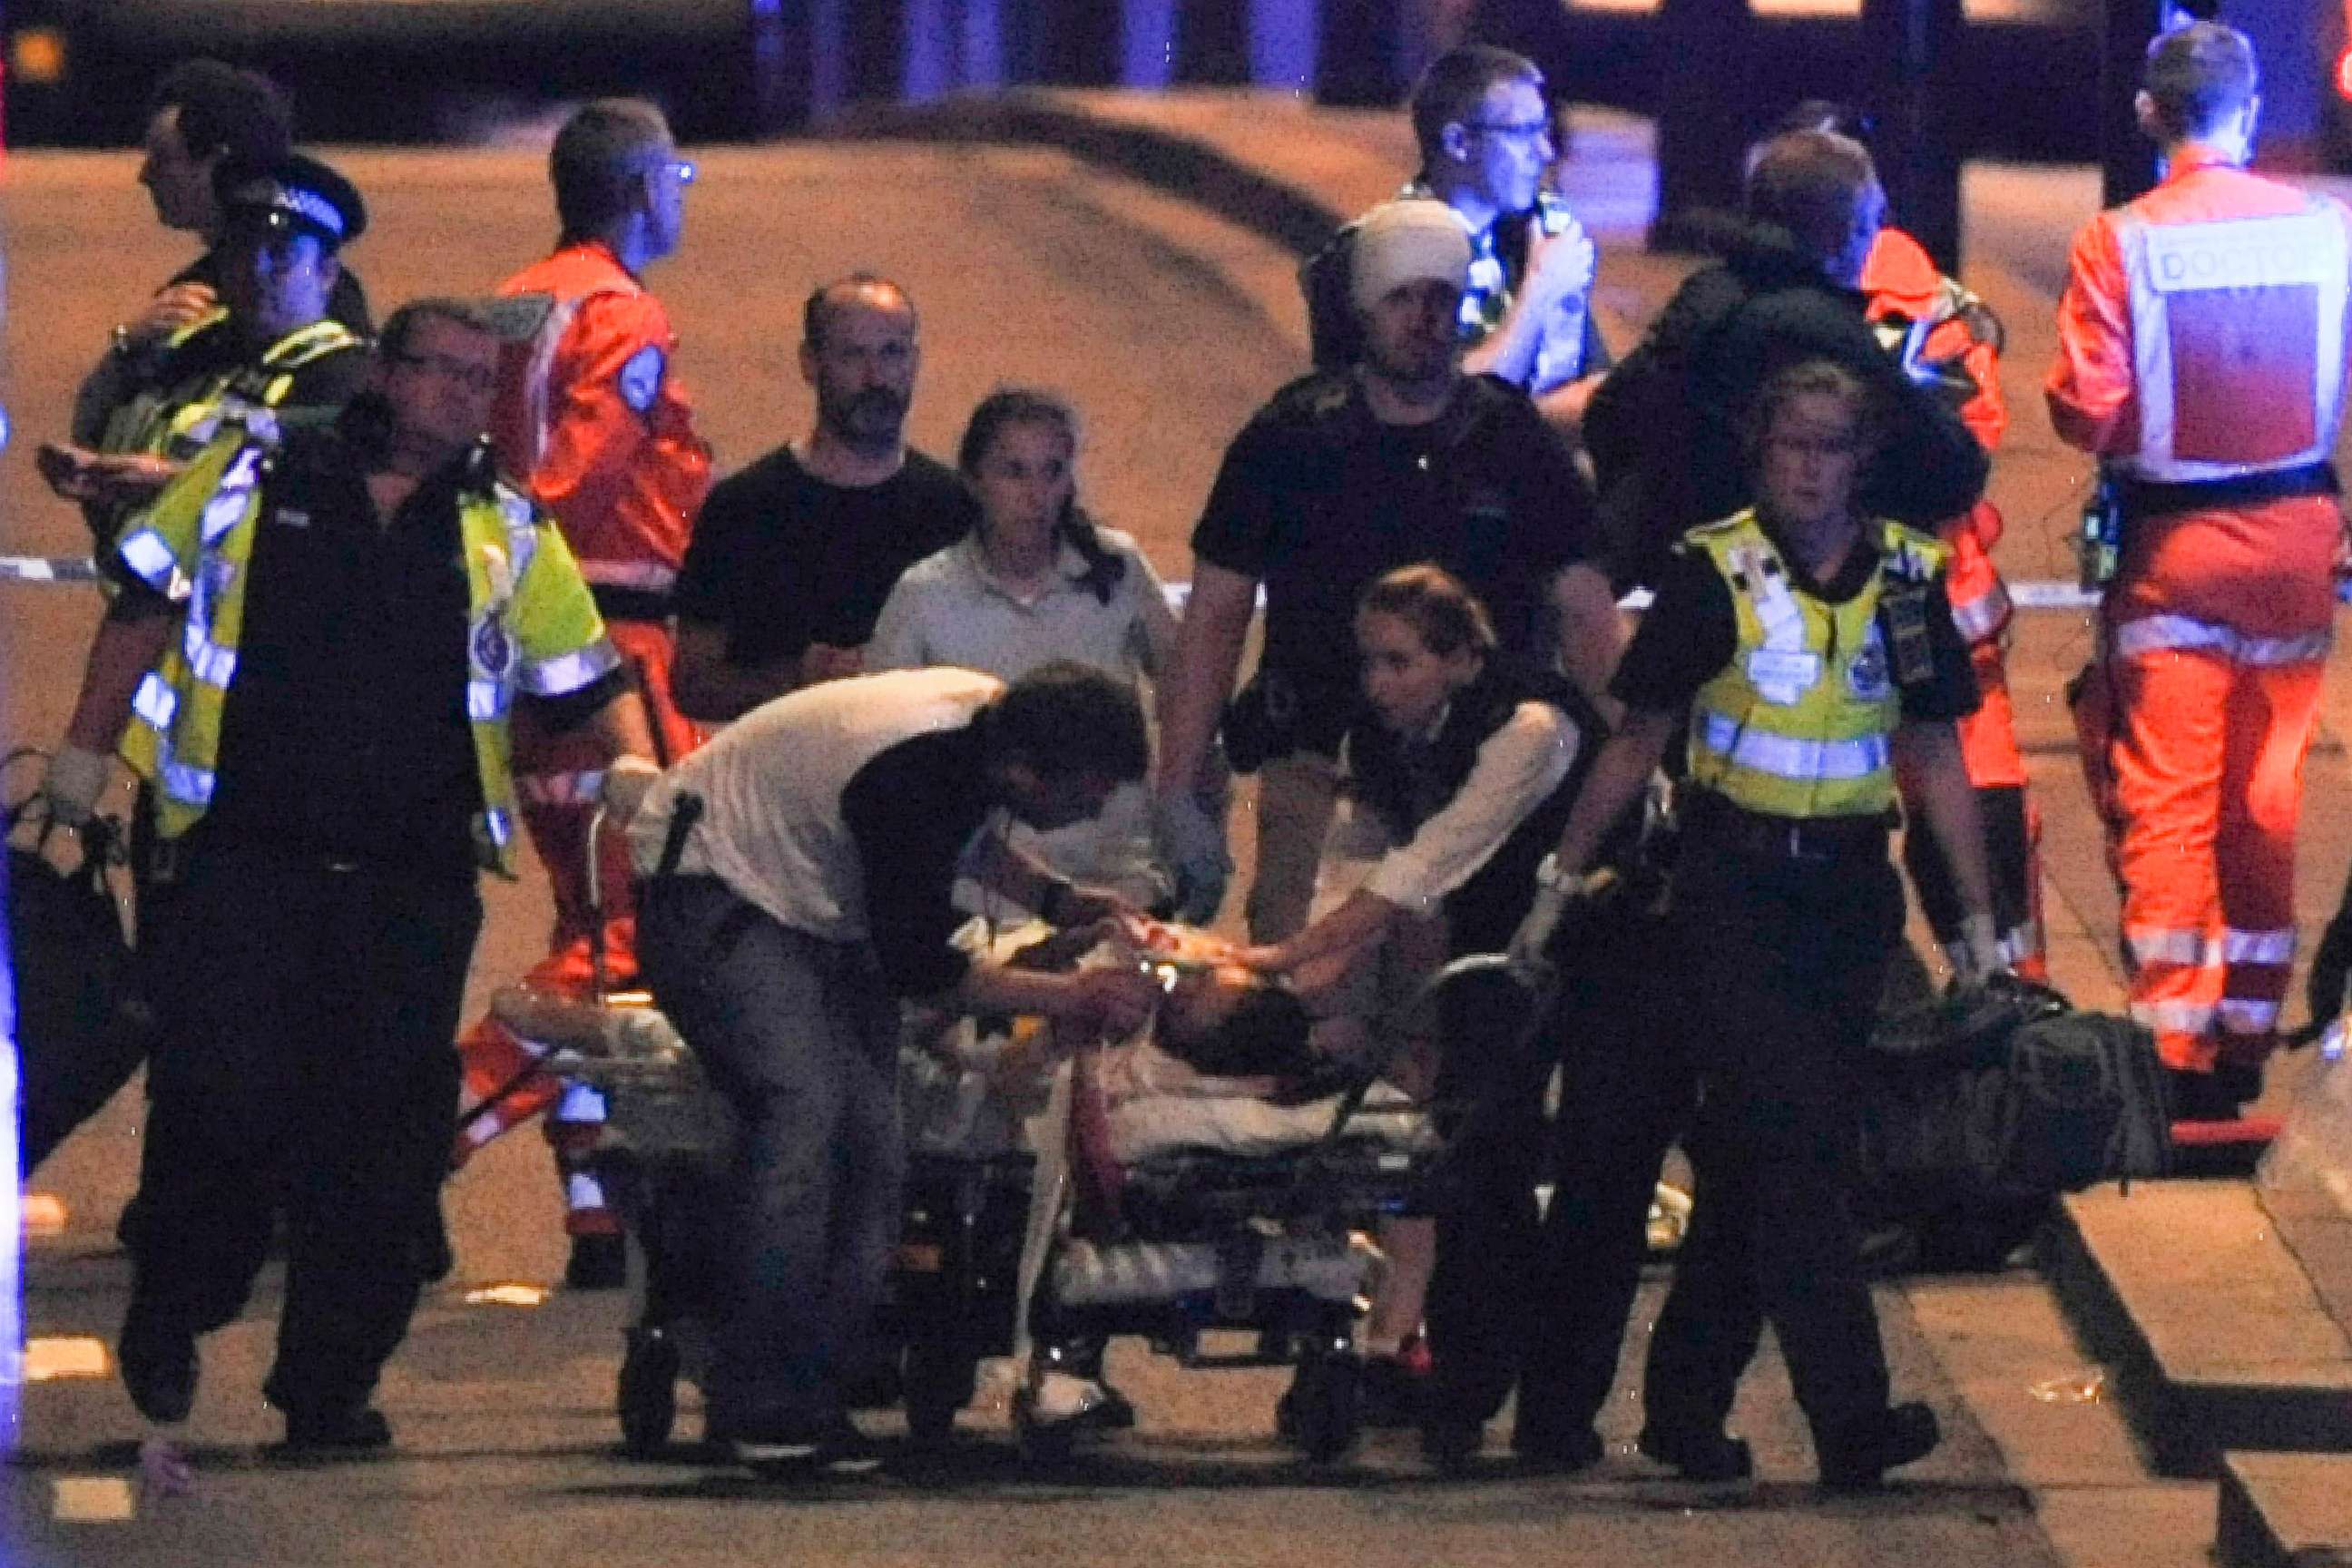 PHOTO: Police and members of the emergency services attend to victims of a terror attack on London Bridge in central London on June 3, 2017.